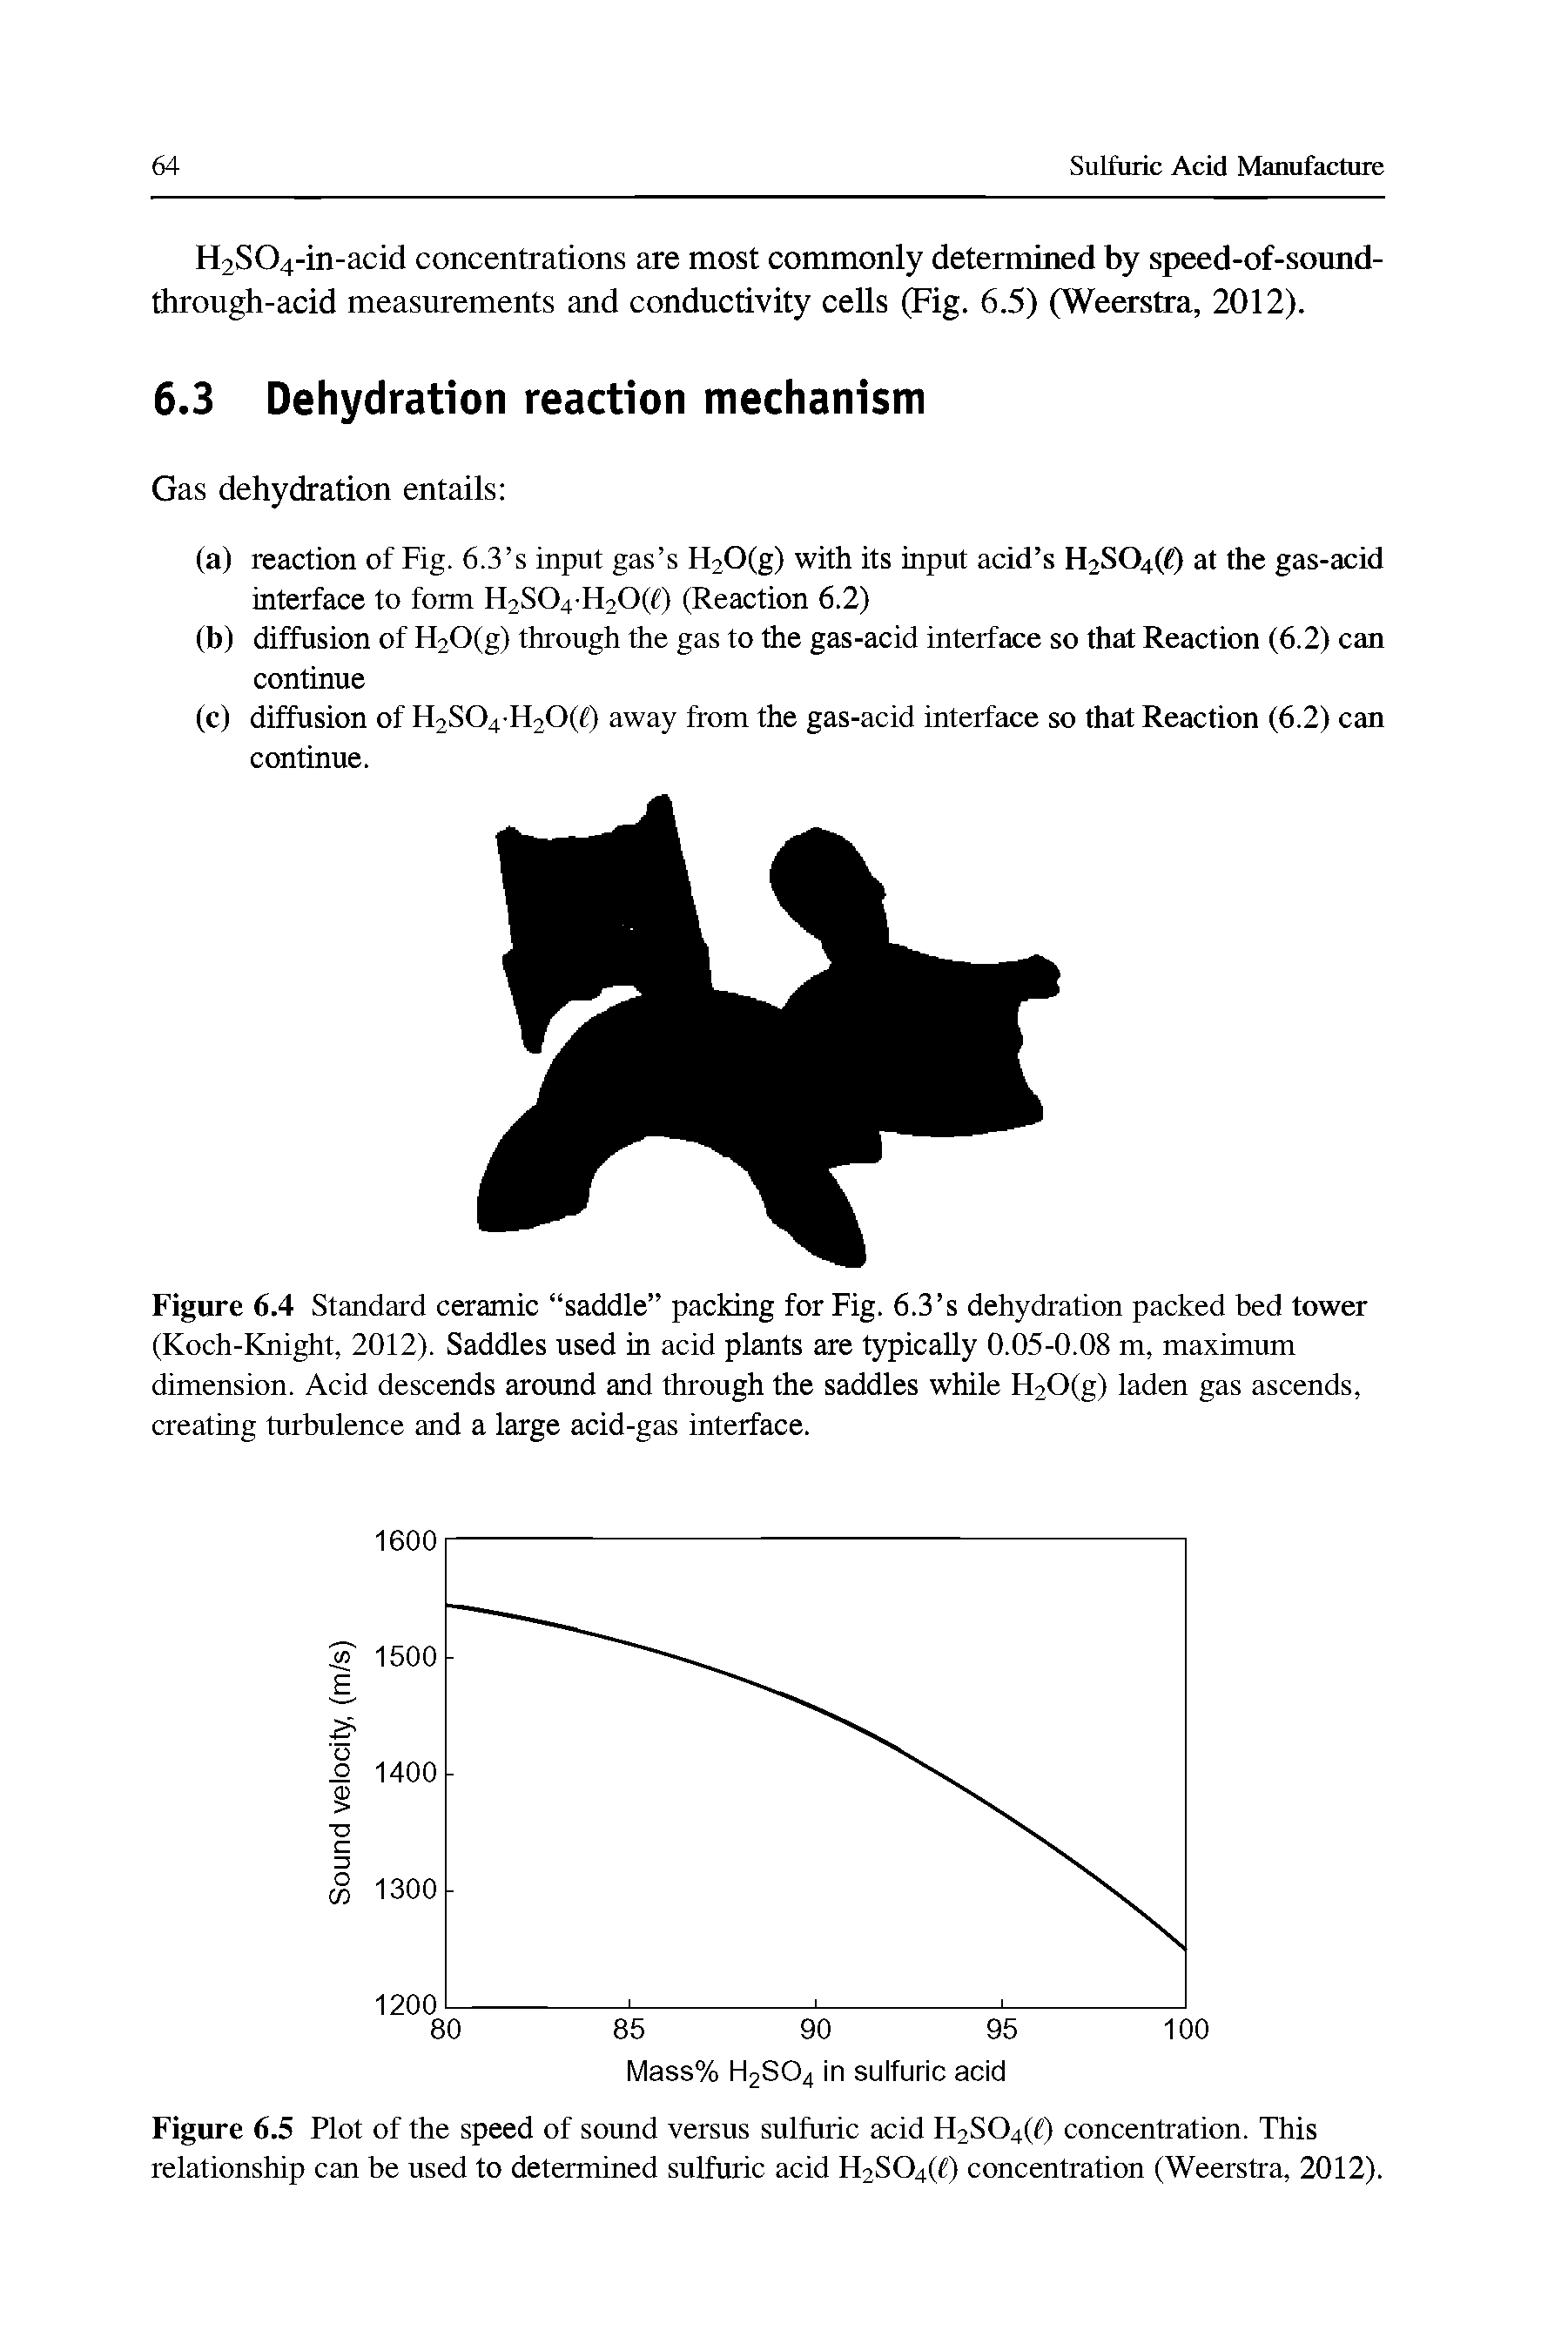 Figure 6.4 Standard ceramic saddle packing for Fig. 6.3 s dehydration packed bed tower (Koch-Knight, 2012). Saddles used in acid plants are typically 0.05-0.08 m, maximum dimension. Acid descends around and through the saddles while H20(g) laden gas ascends, creating turbulence and a large acid-gas interface.